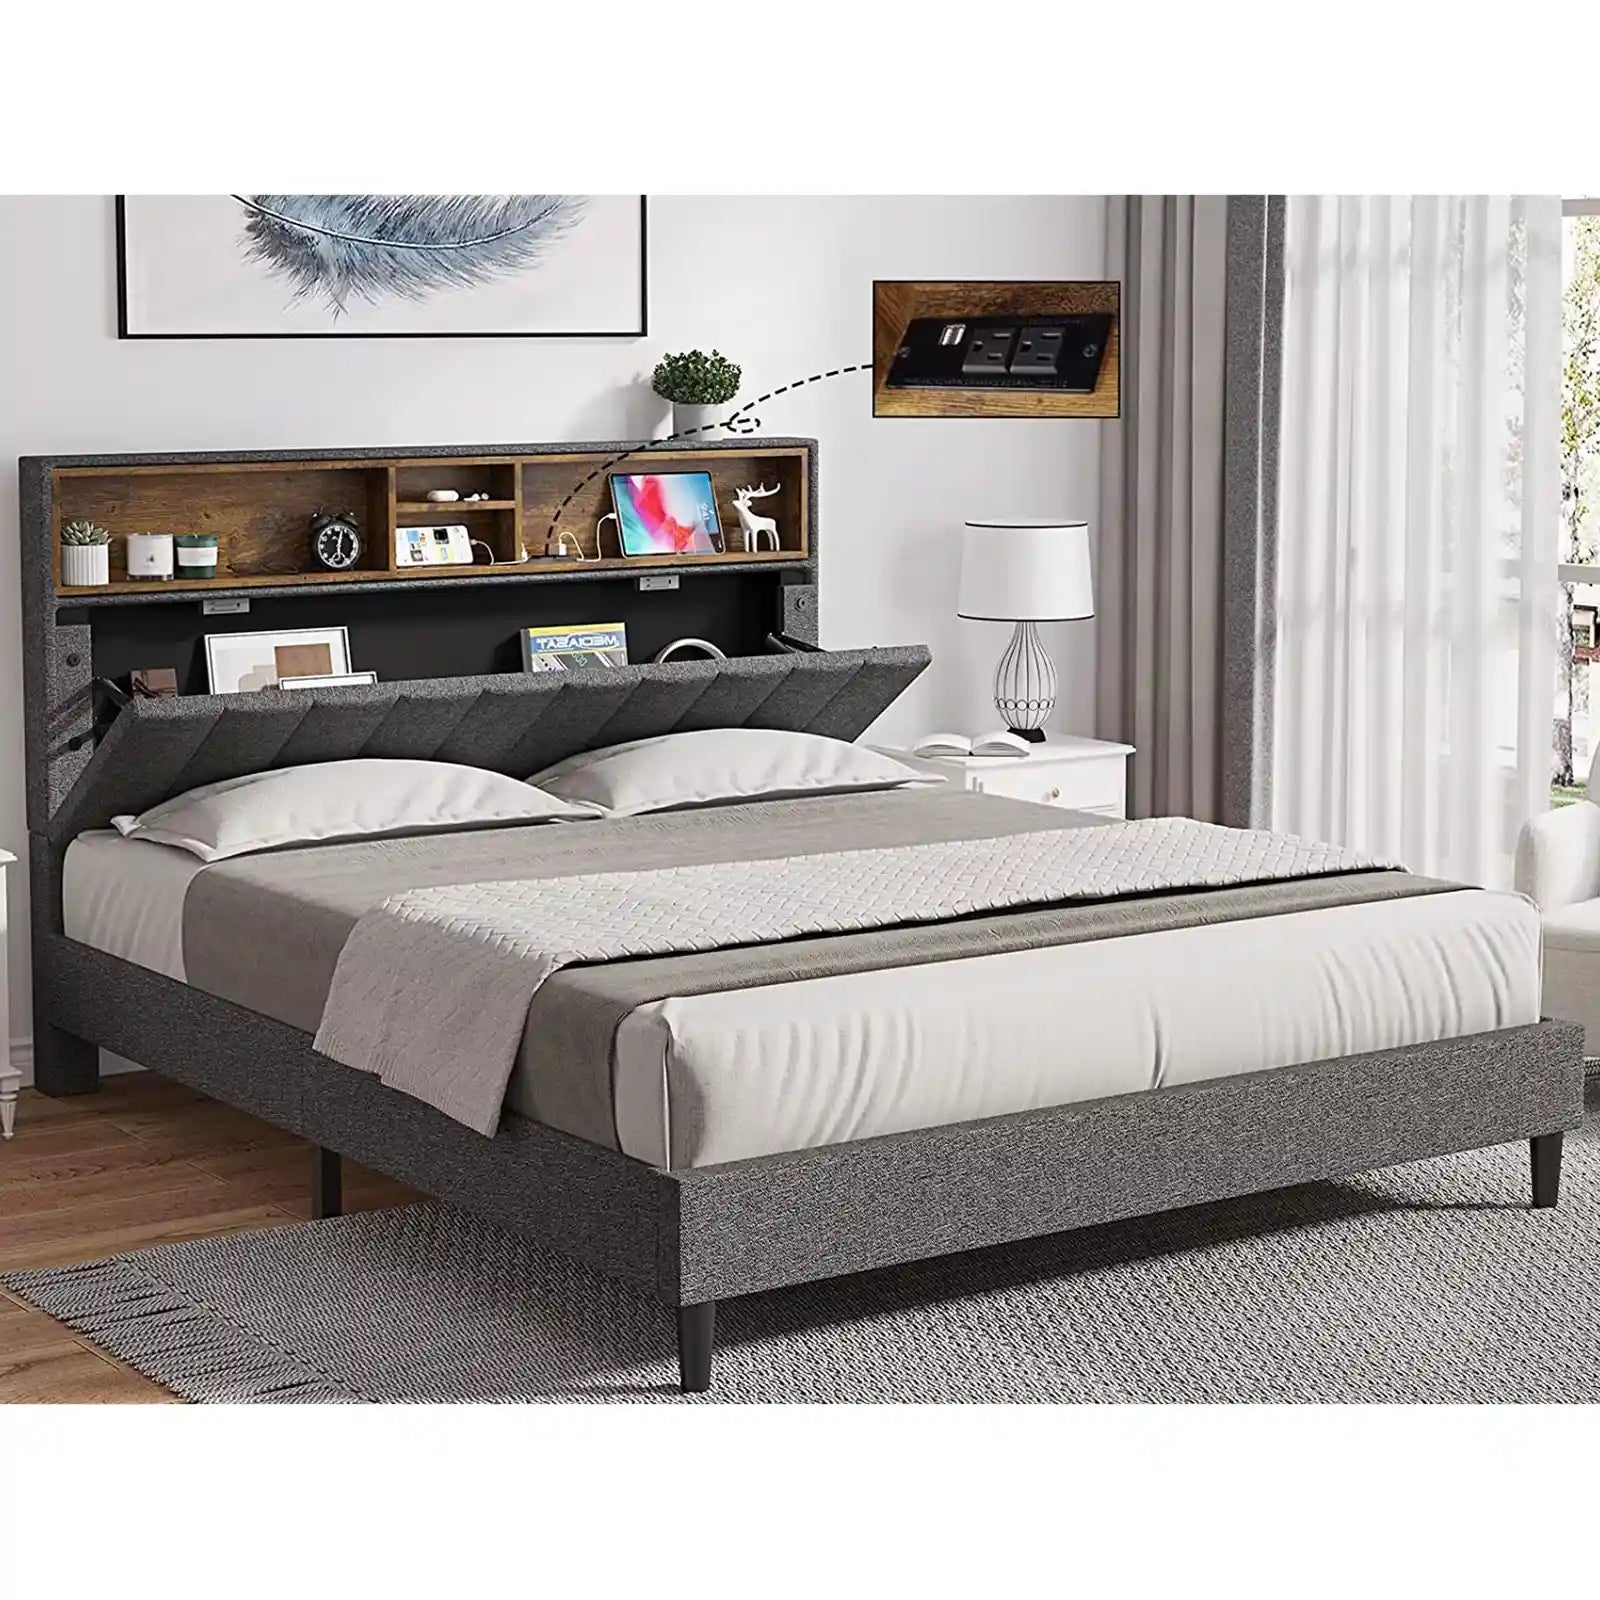 Modern Fabric Upholstered Platform Bed Frame with Power Strip and Storage Headboard